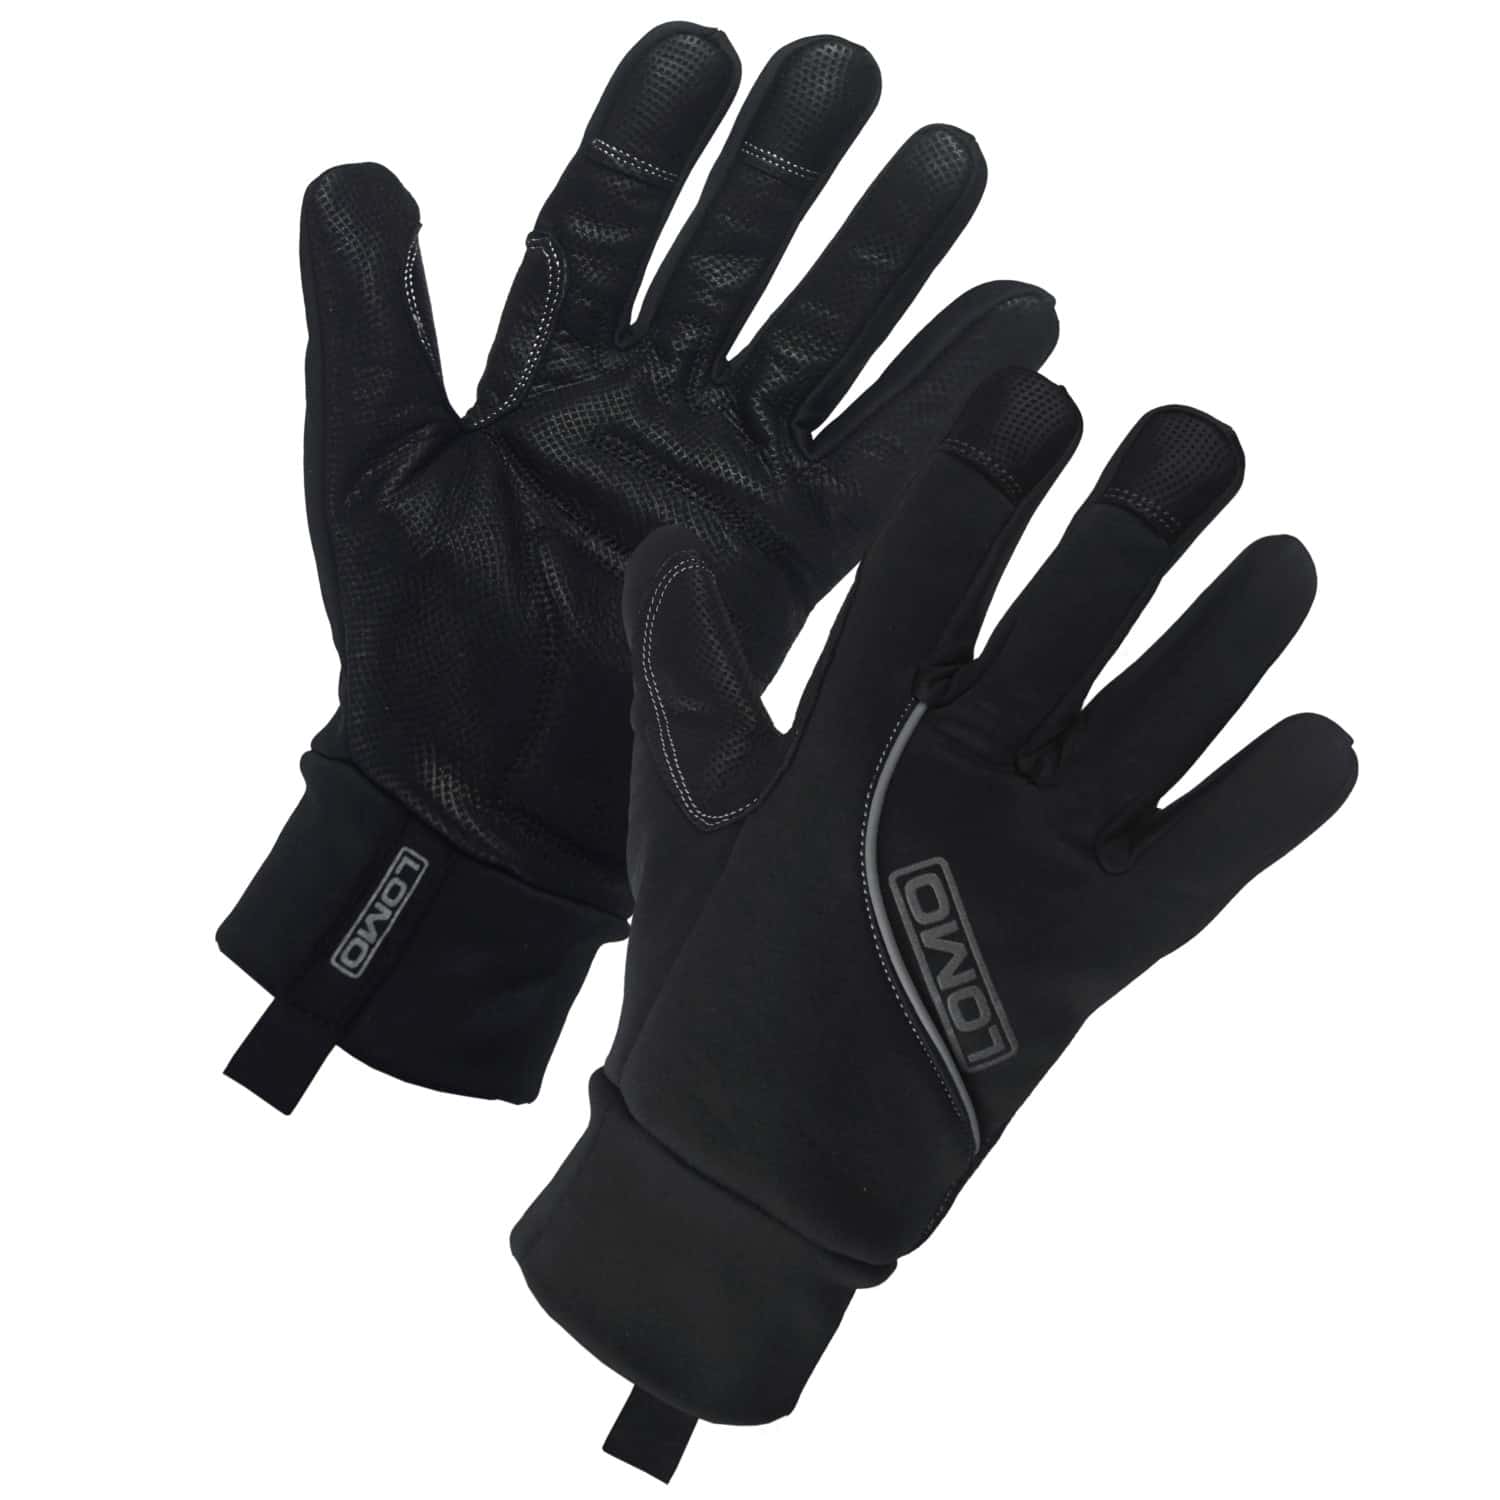 Textured gloves like these, are slip resistant and waterproof making them suitable for rainy and snowy weather. 